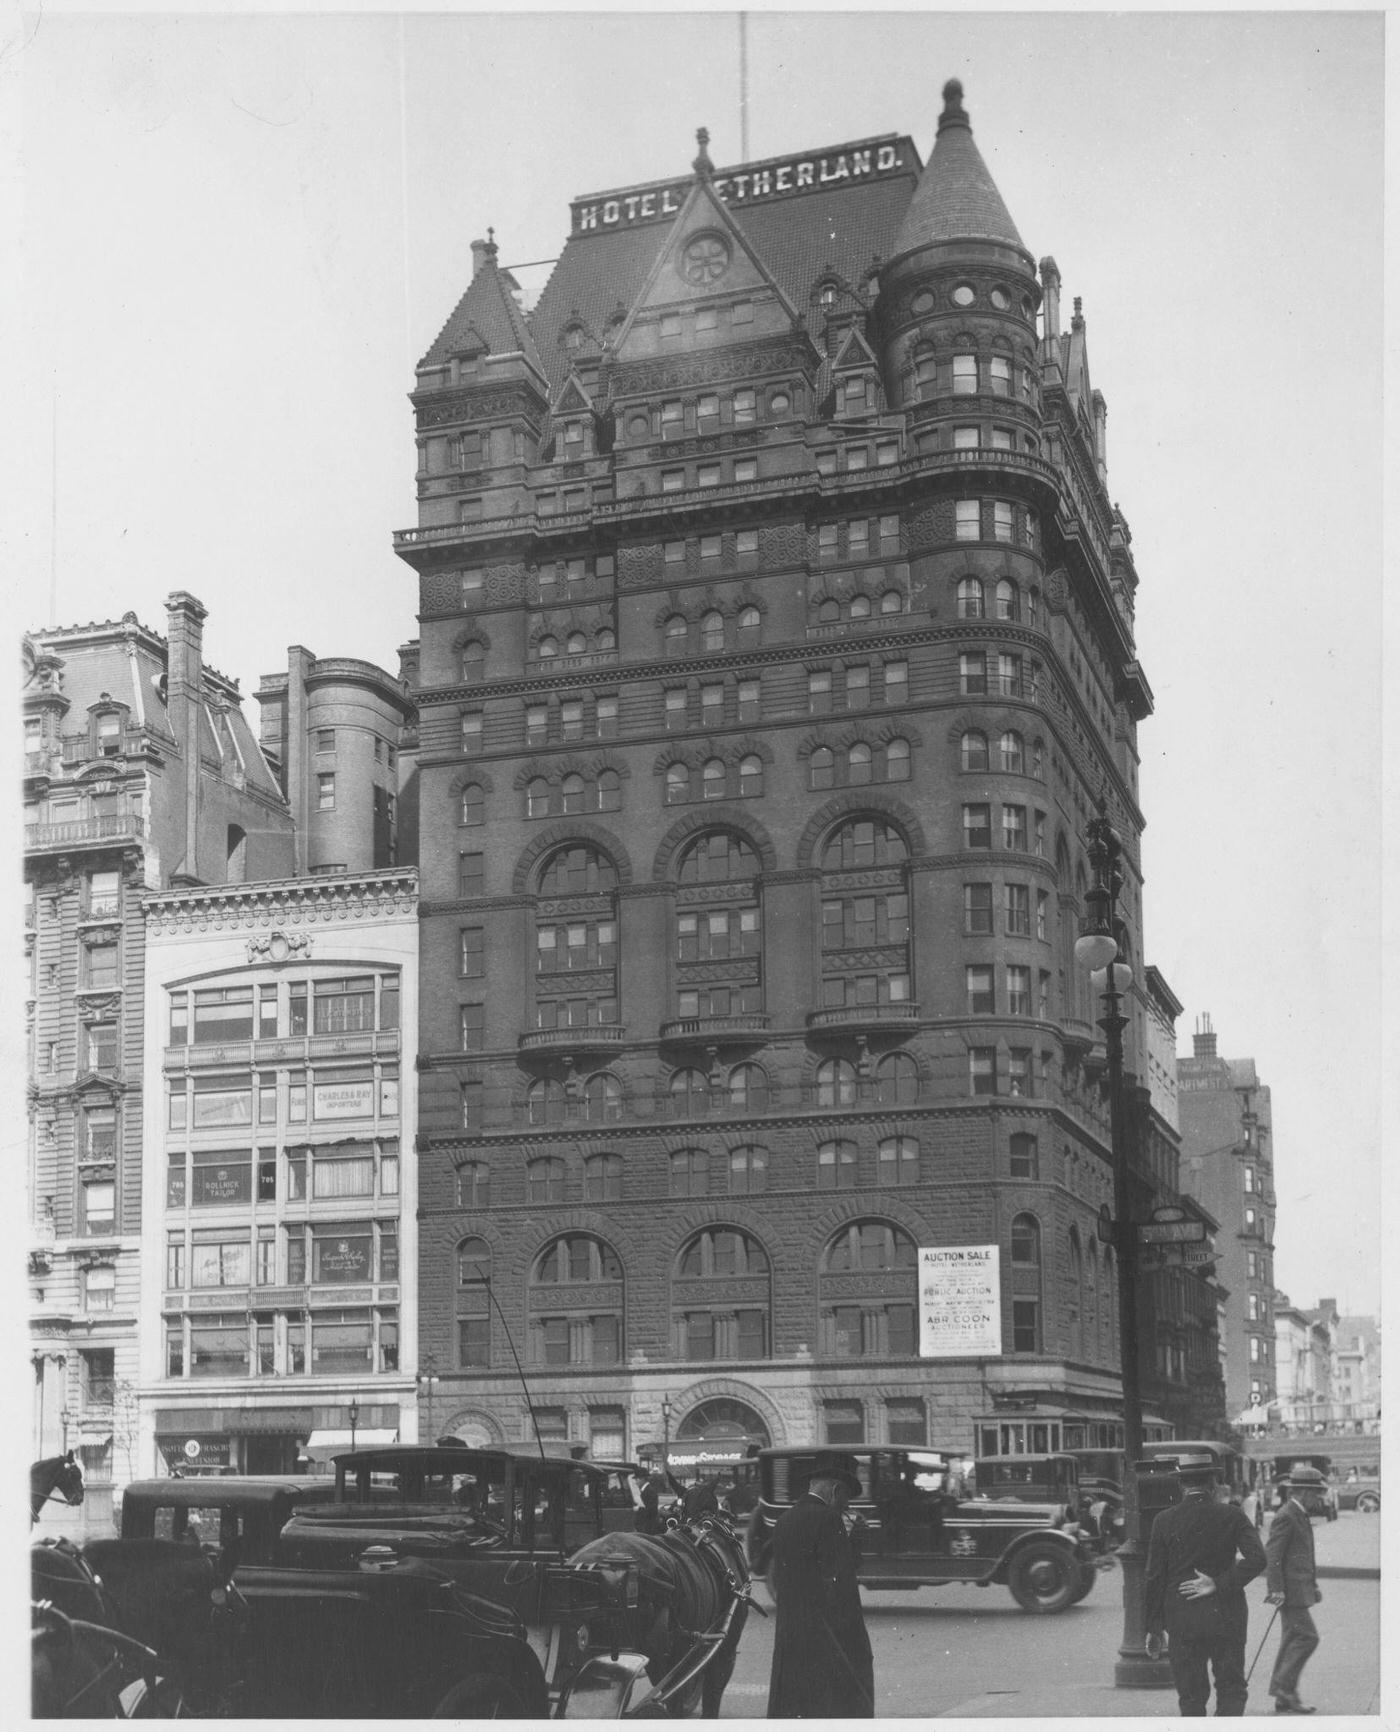 Hotel Netherland, 59Th Street And Fifth Avenue, New York City, 1924.